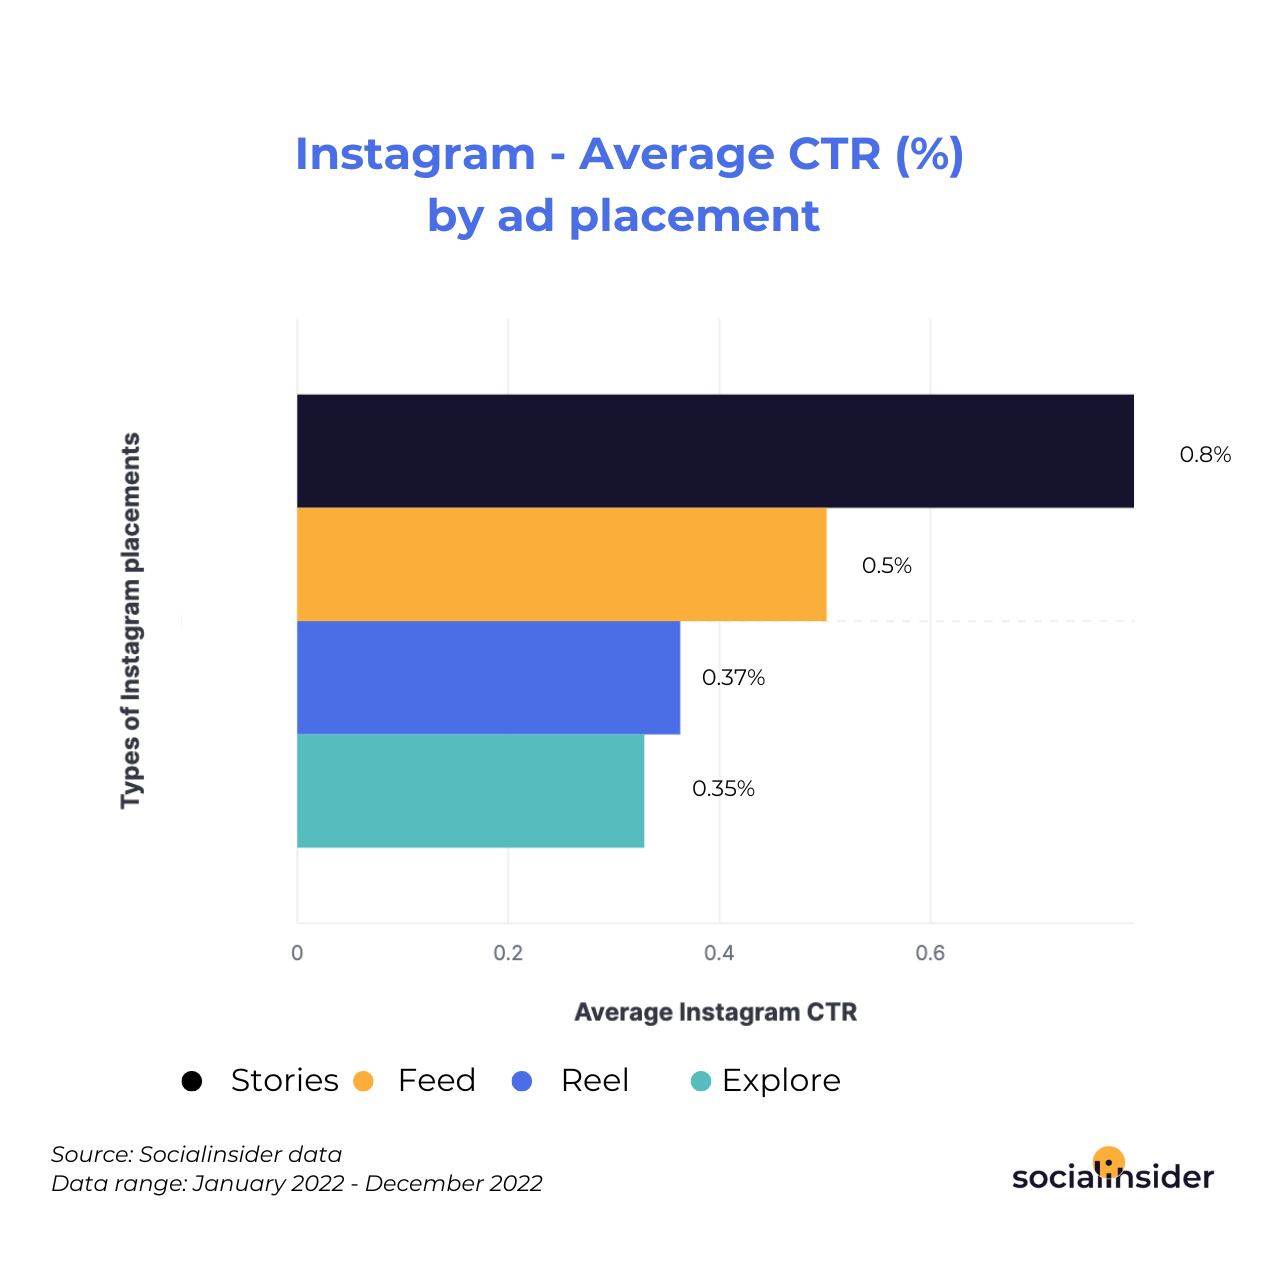 Instagram - Average CTR by ad placement